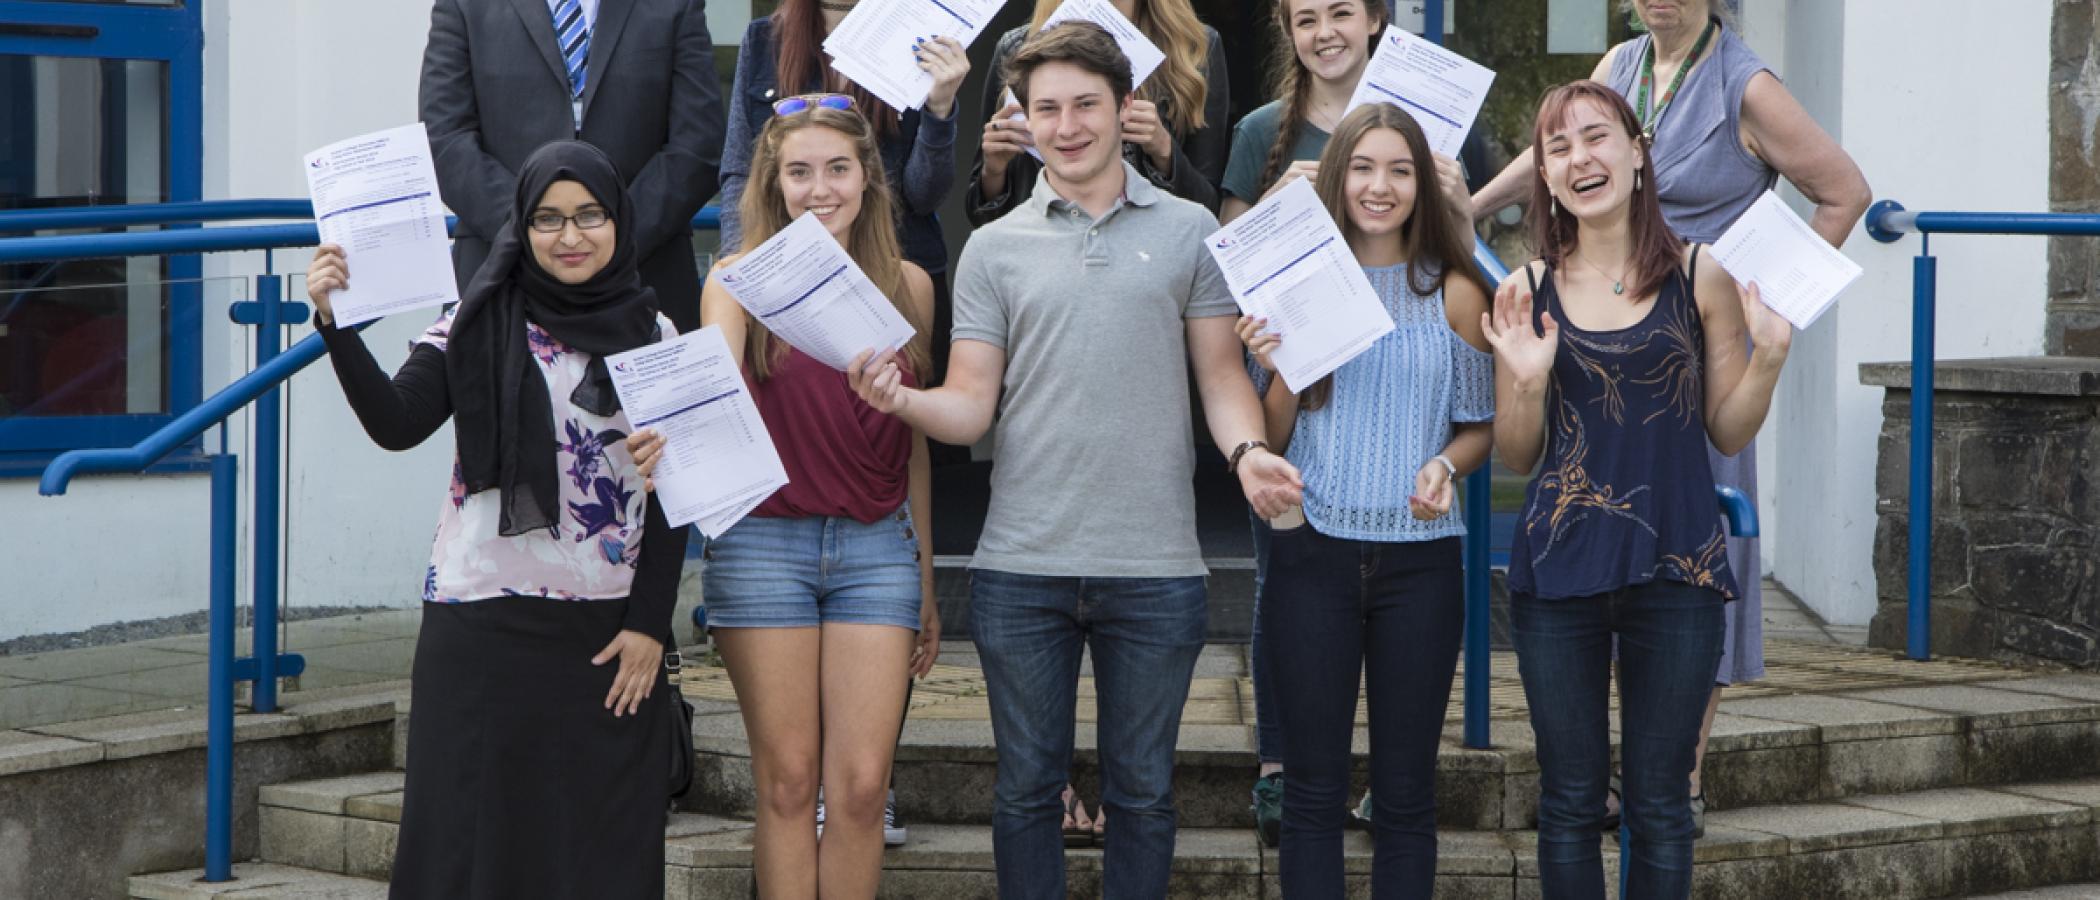 Gower College Swansea A Level results 2016